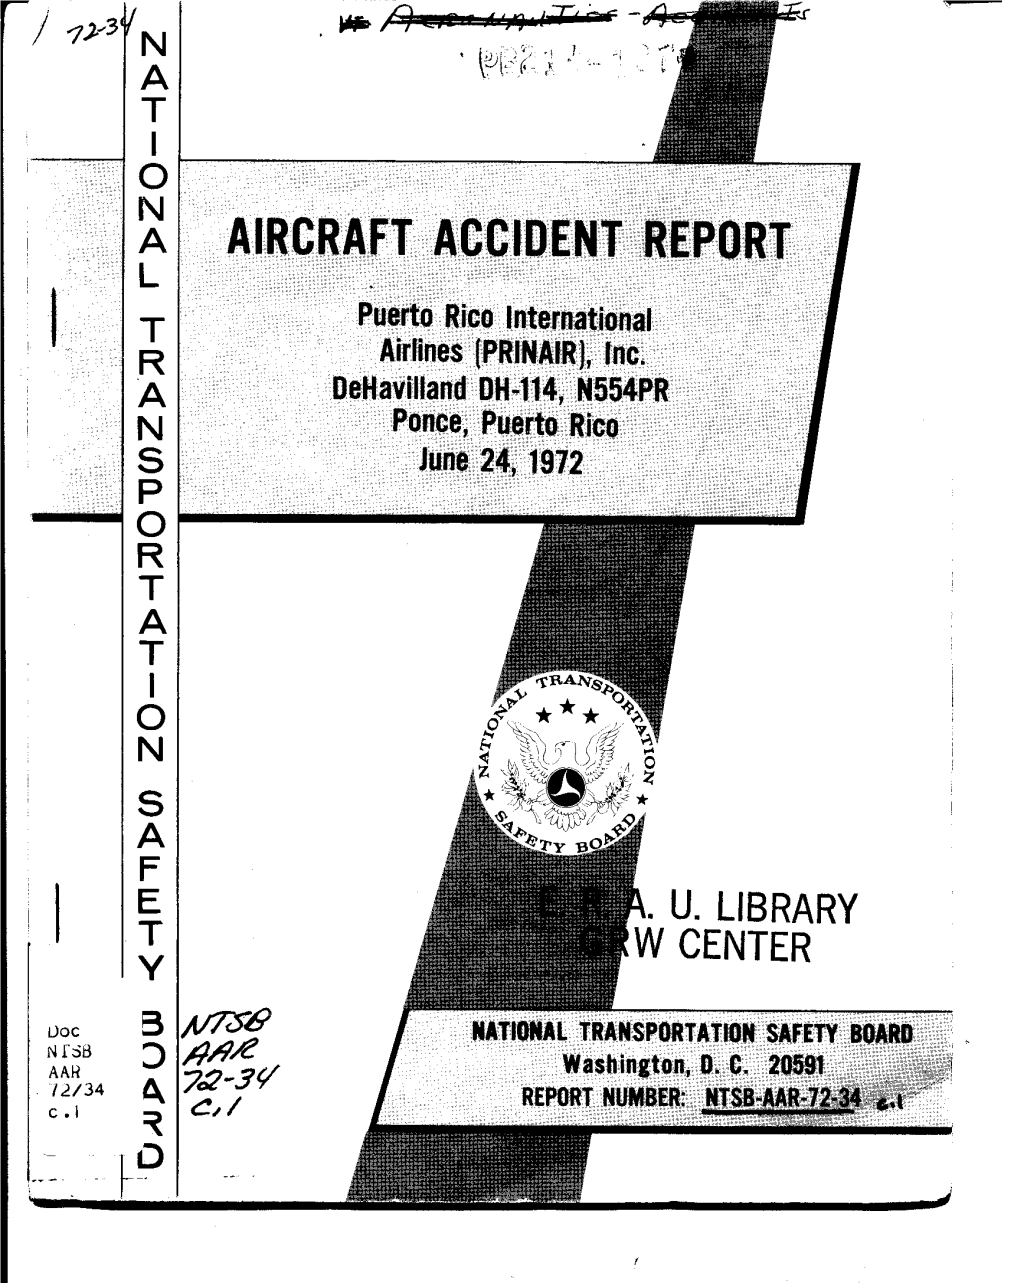 AIRCRAFT ACCIDENT REPORT Puerto Rico International Airlines (PRINAIR), Inc